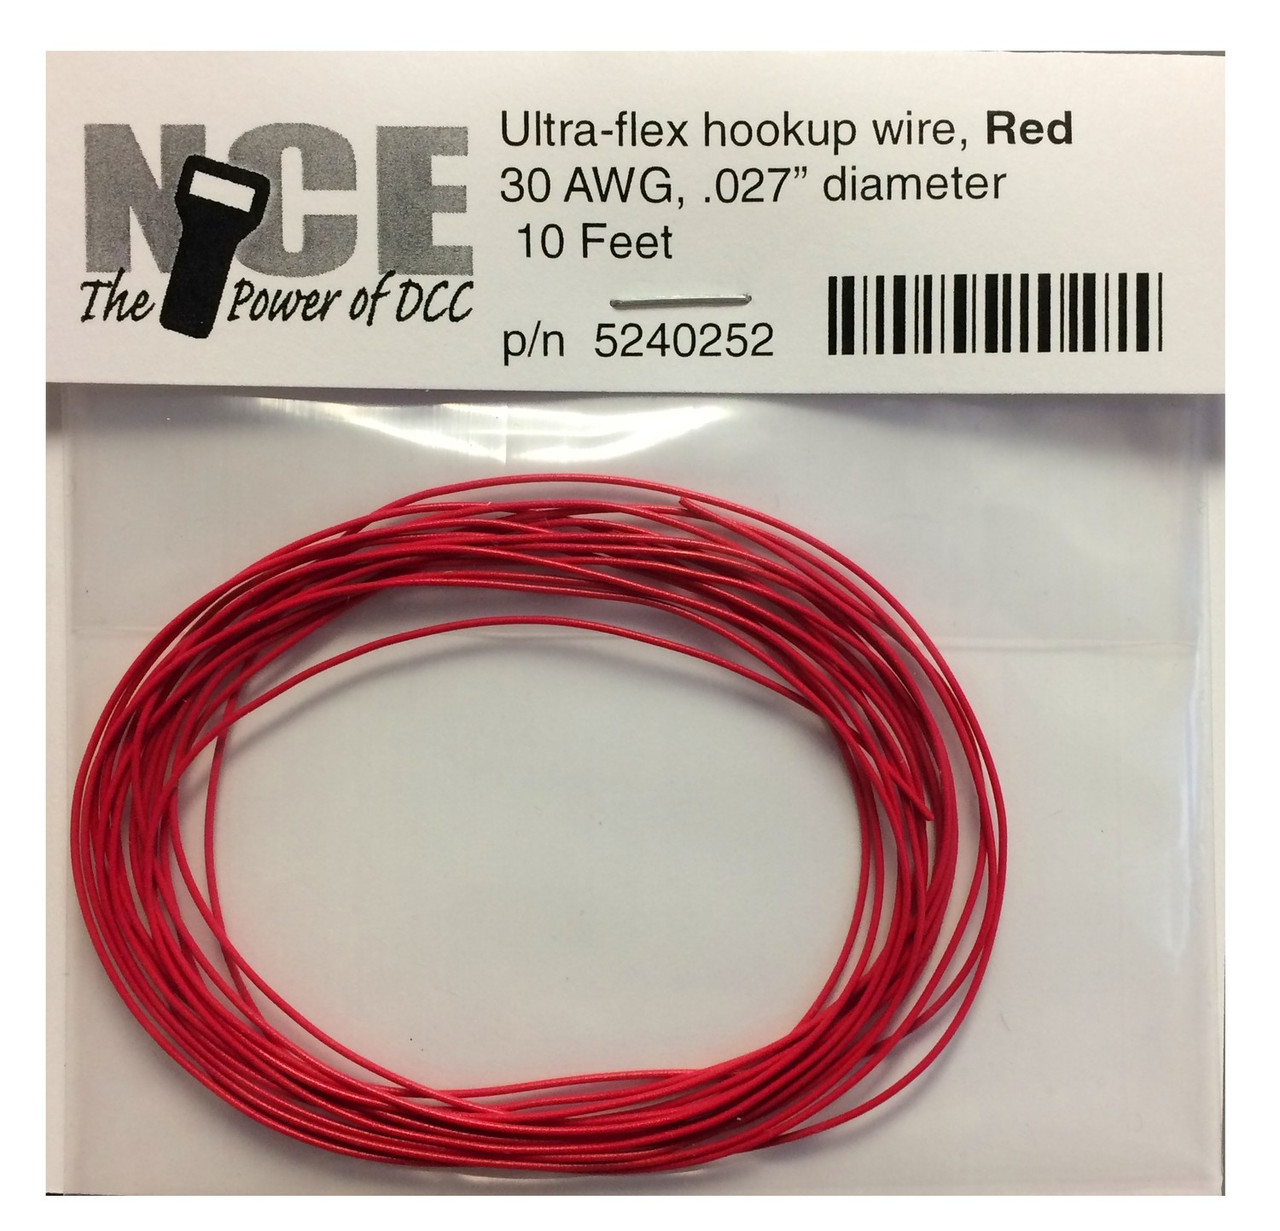 NCE DCC 5240252 10' of 30 Gauge Wire, Red